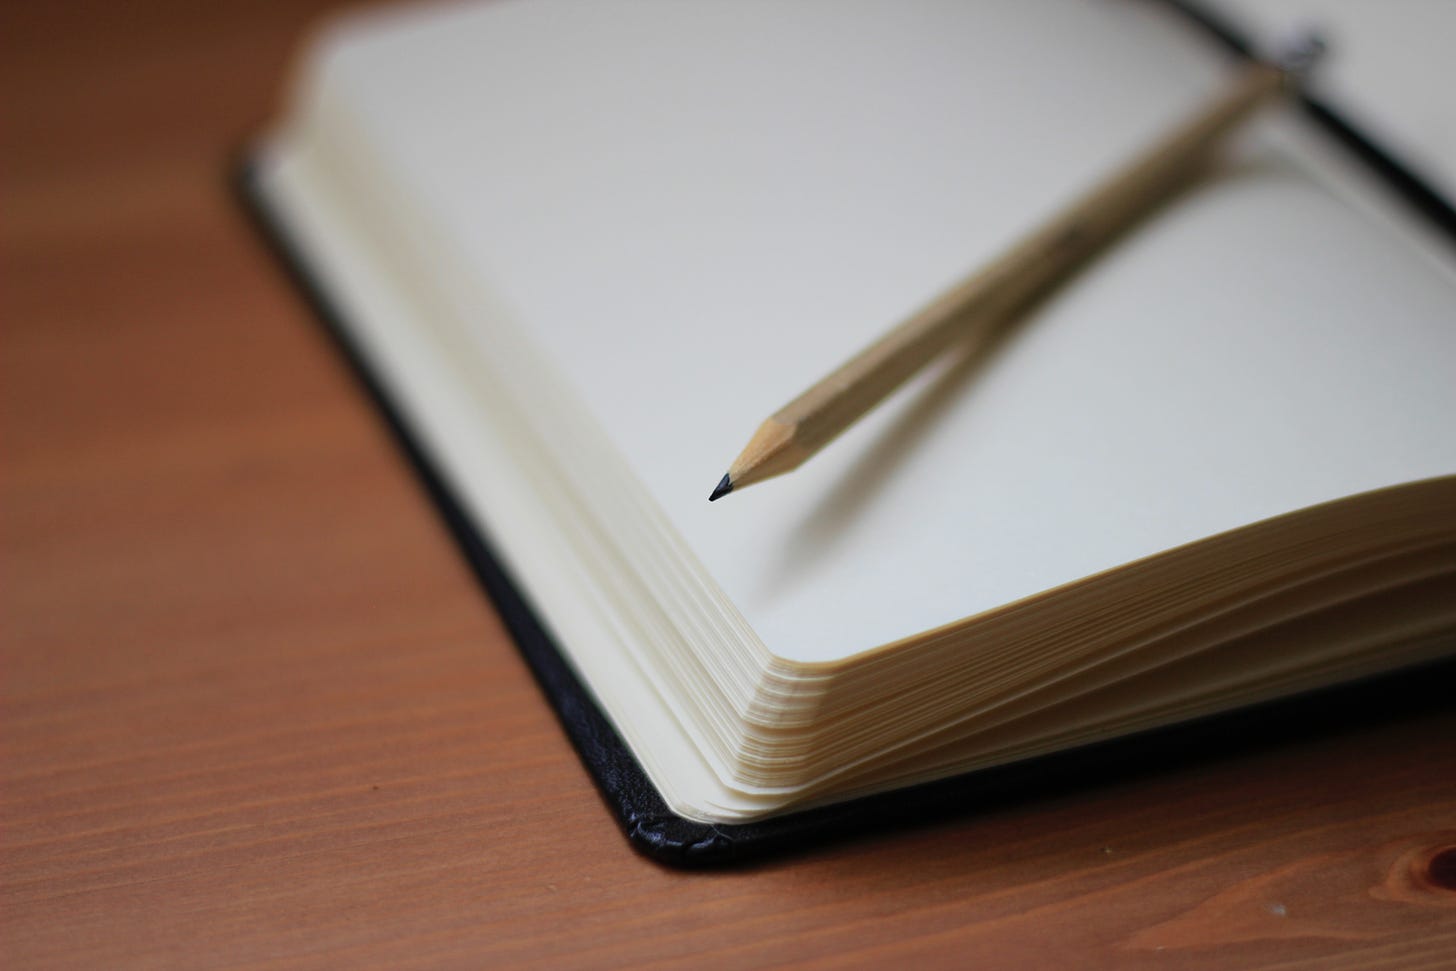 A brown pencil sits on blank white page of a notebook. The notebook is on a brown table.